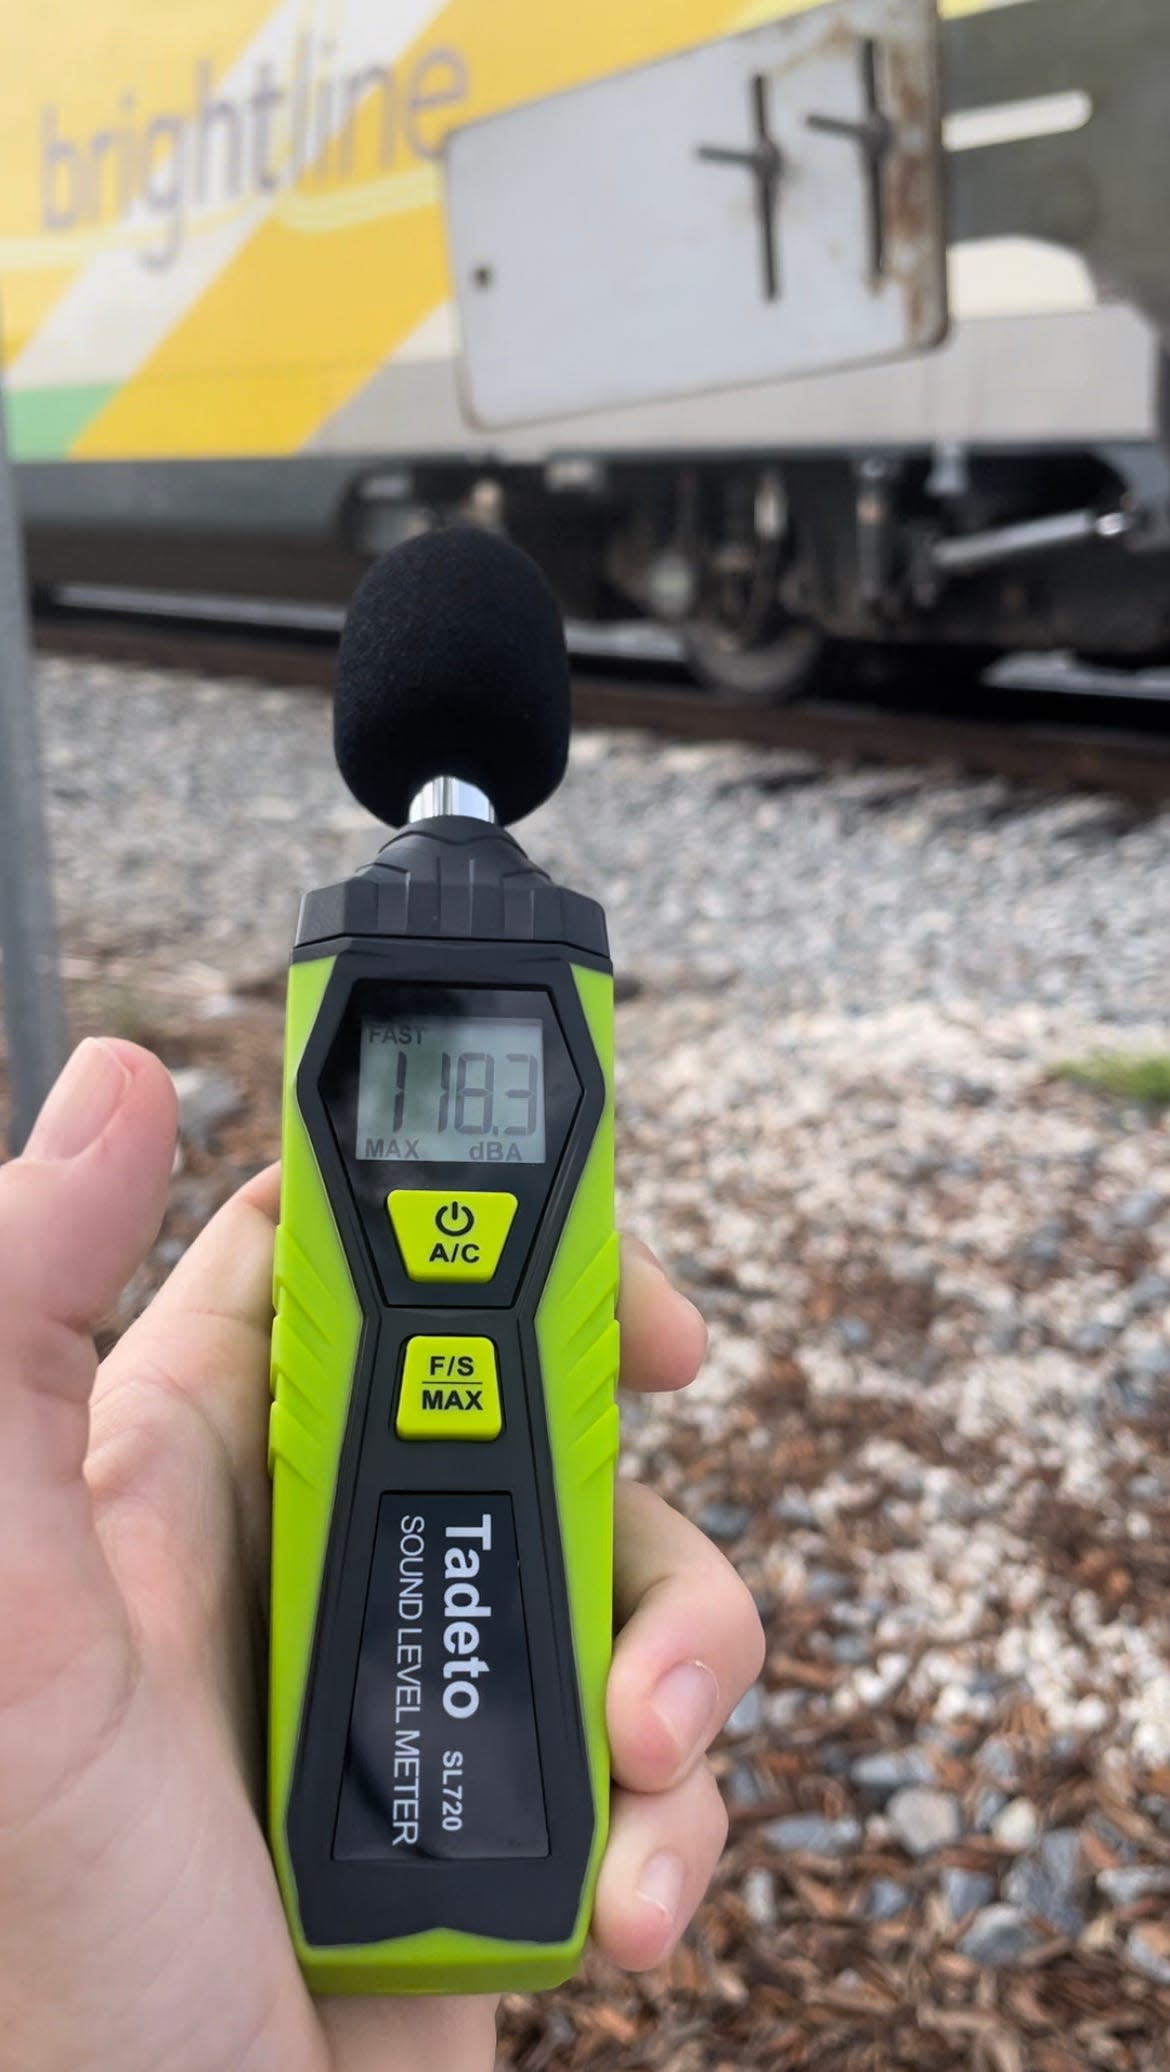 TCPalm bought a decibel reader, tested the volume of the Brightline train versus the freight train as close to the tracks as possible and found both to be about 118 decibels.